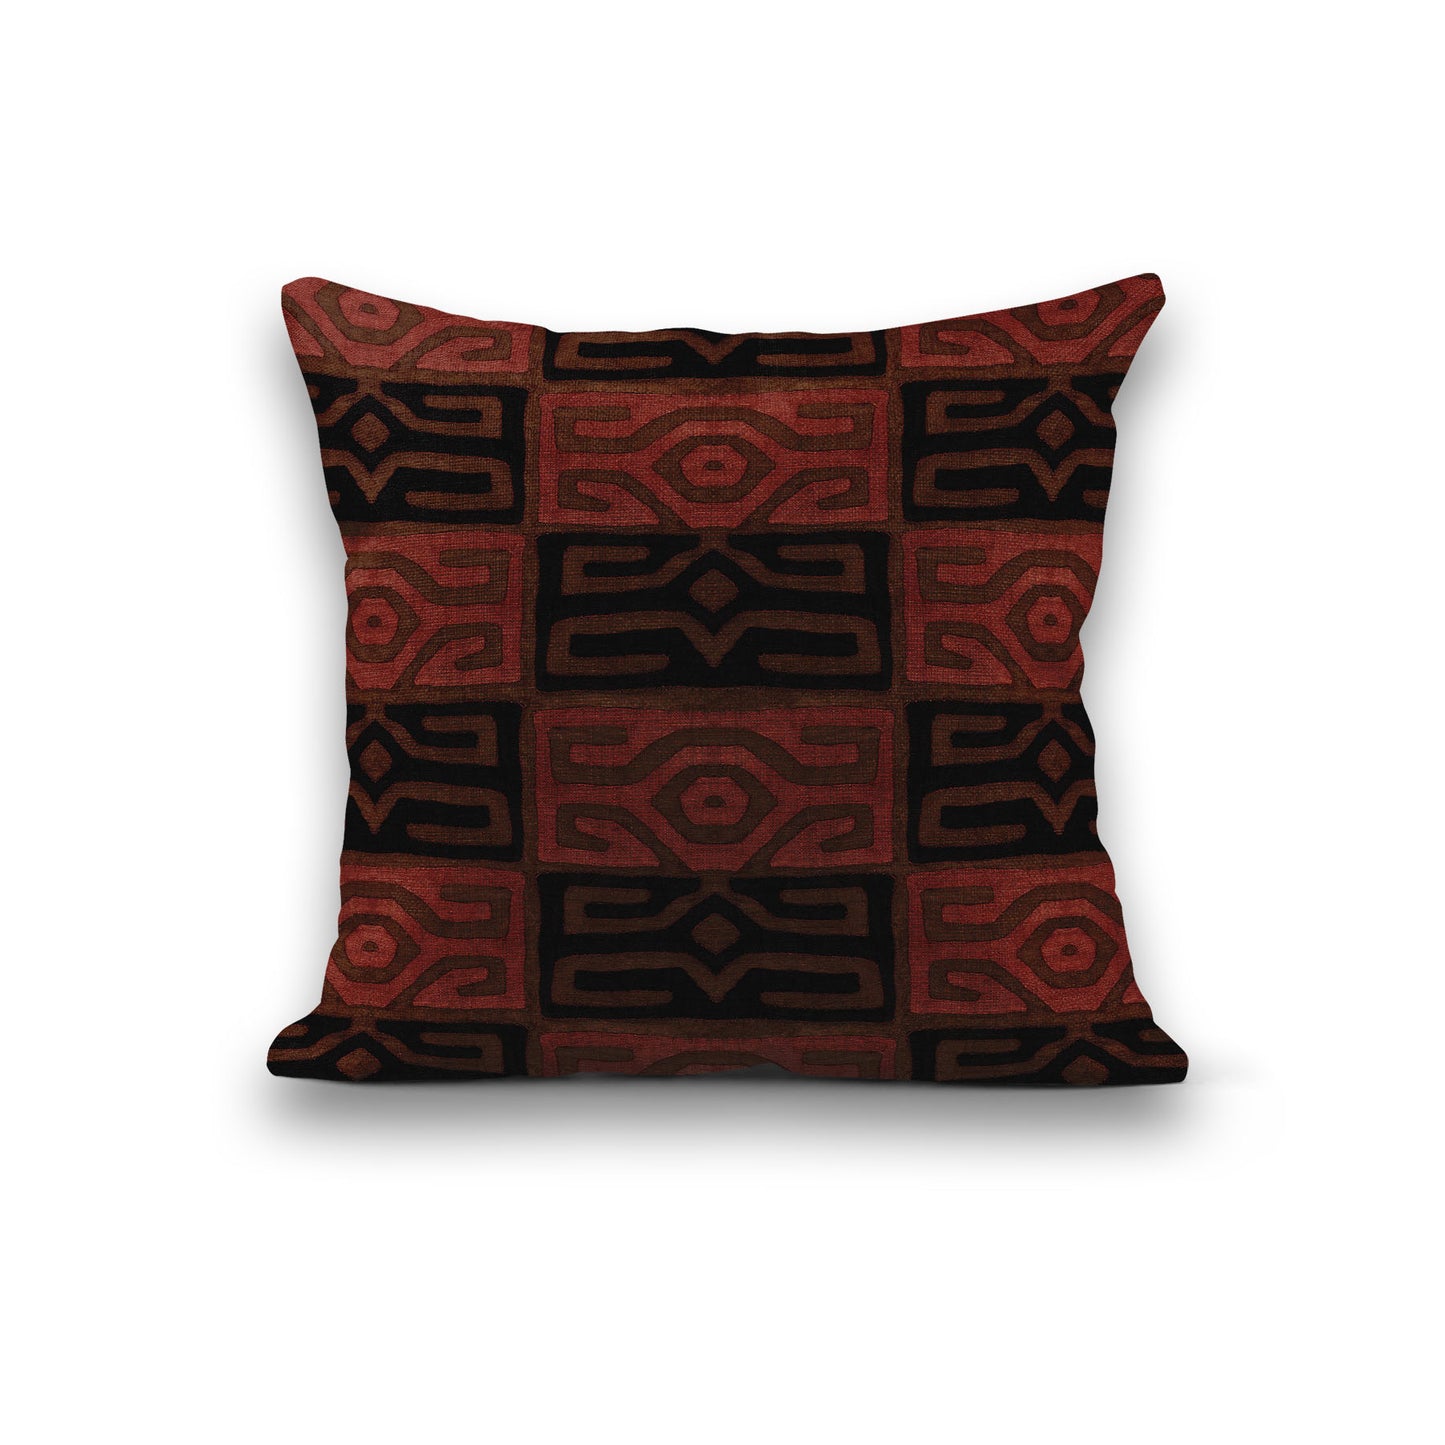 AnitaveeTextile African Kuba Cloth Pillows Print Cover and Insert - 3 Sizes